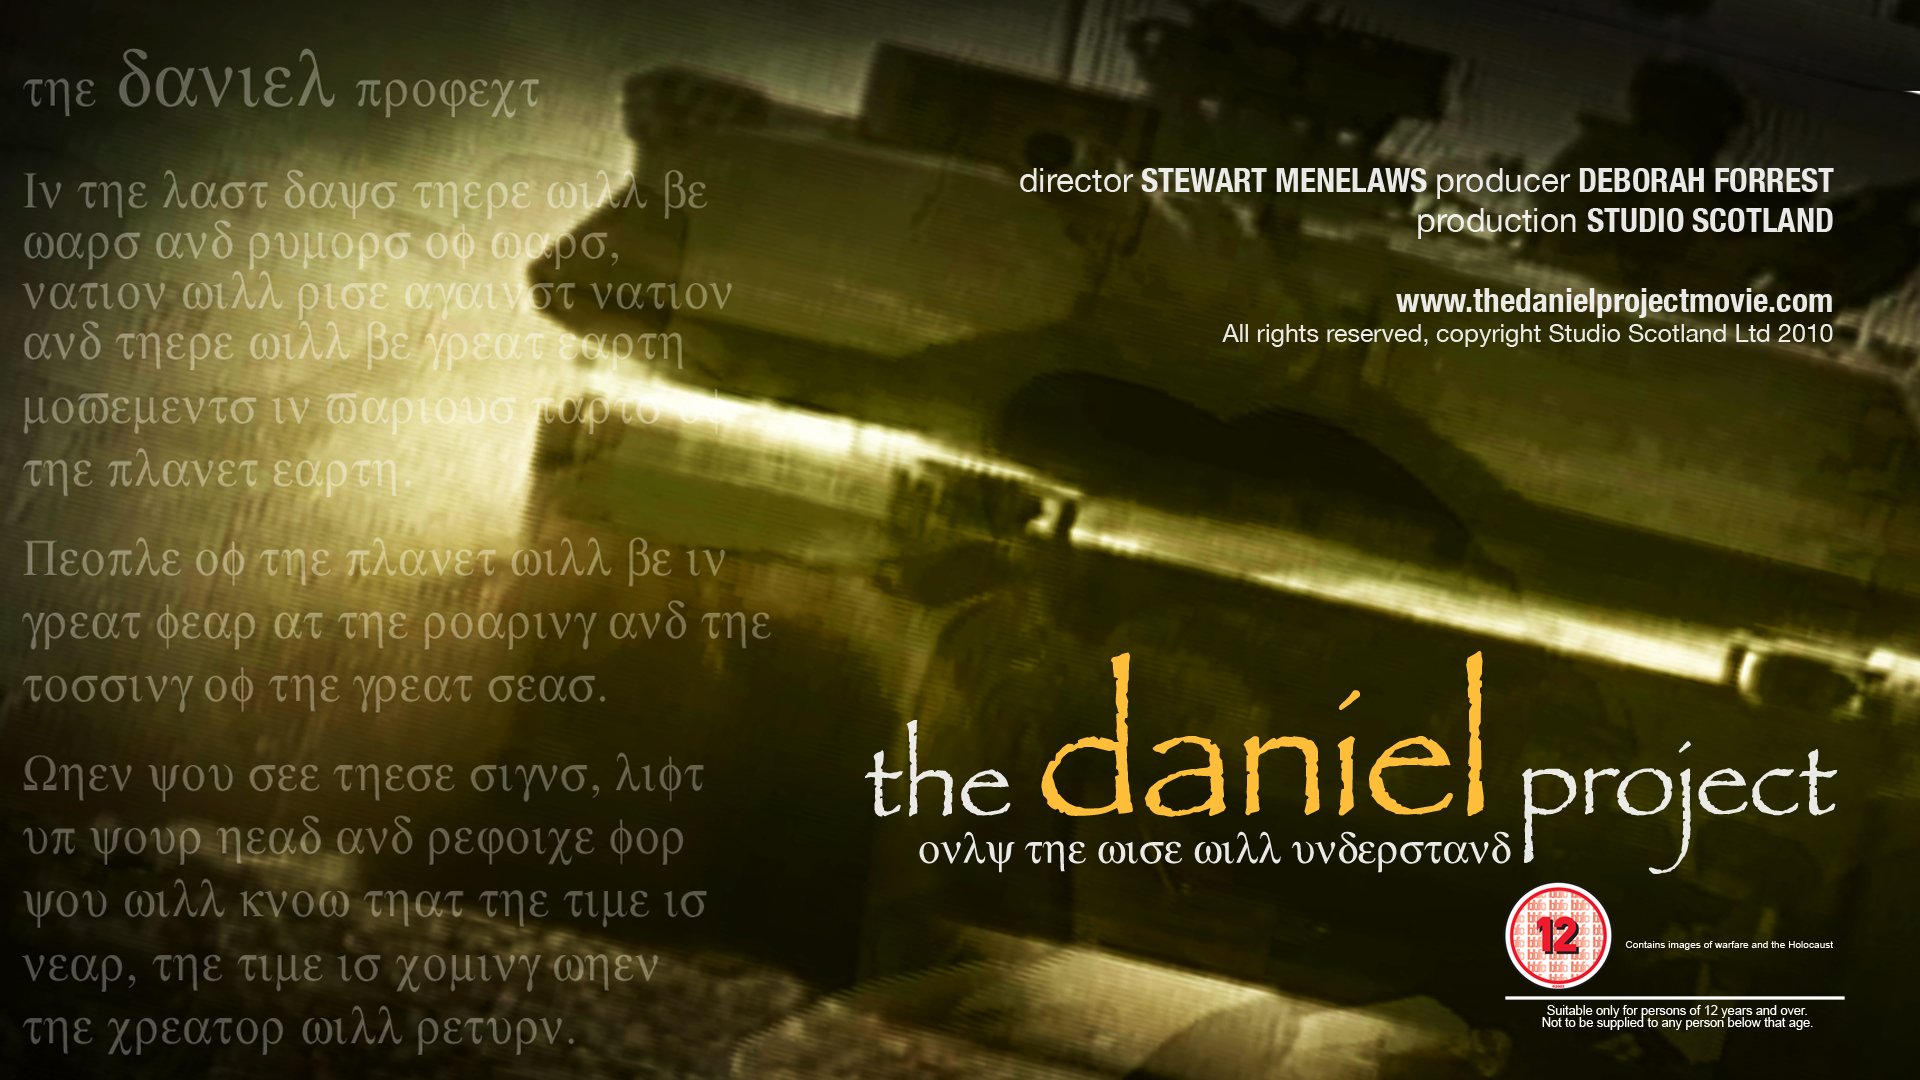 The Daniel Project - theatrical doc